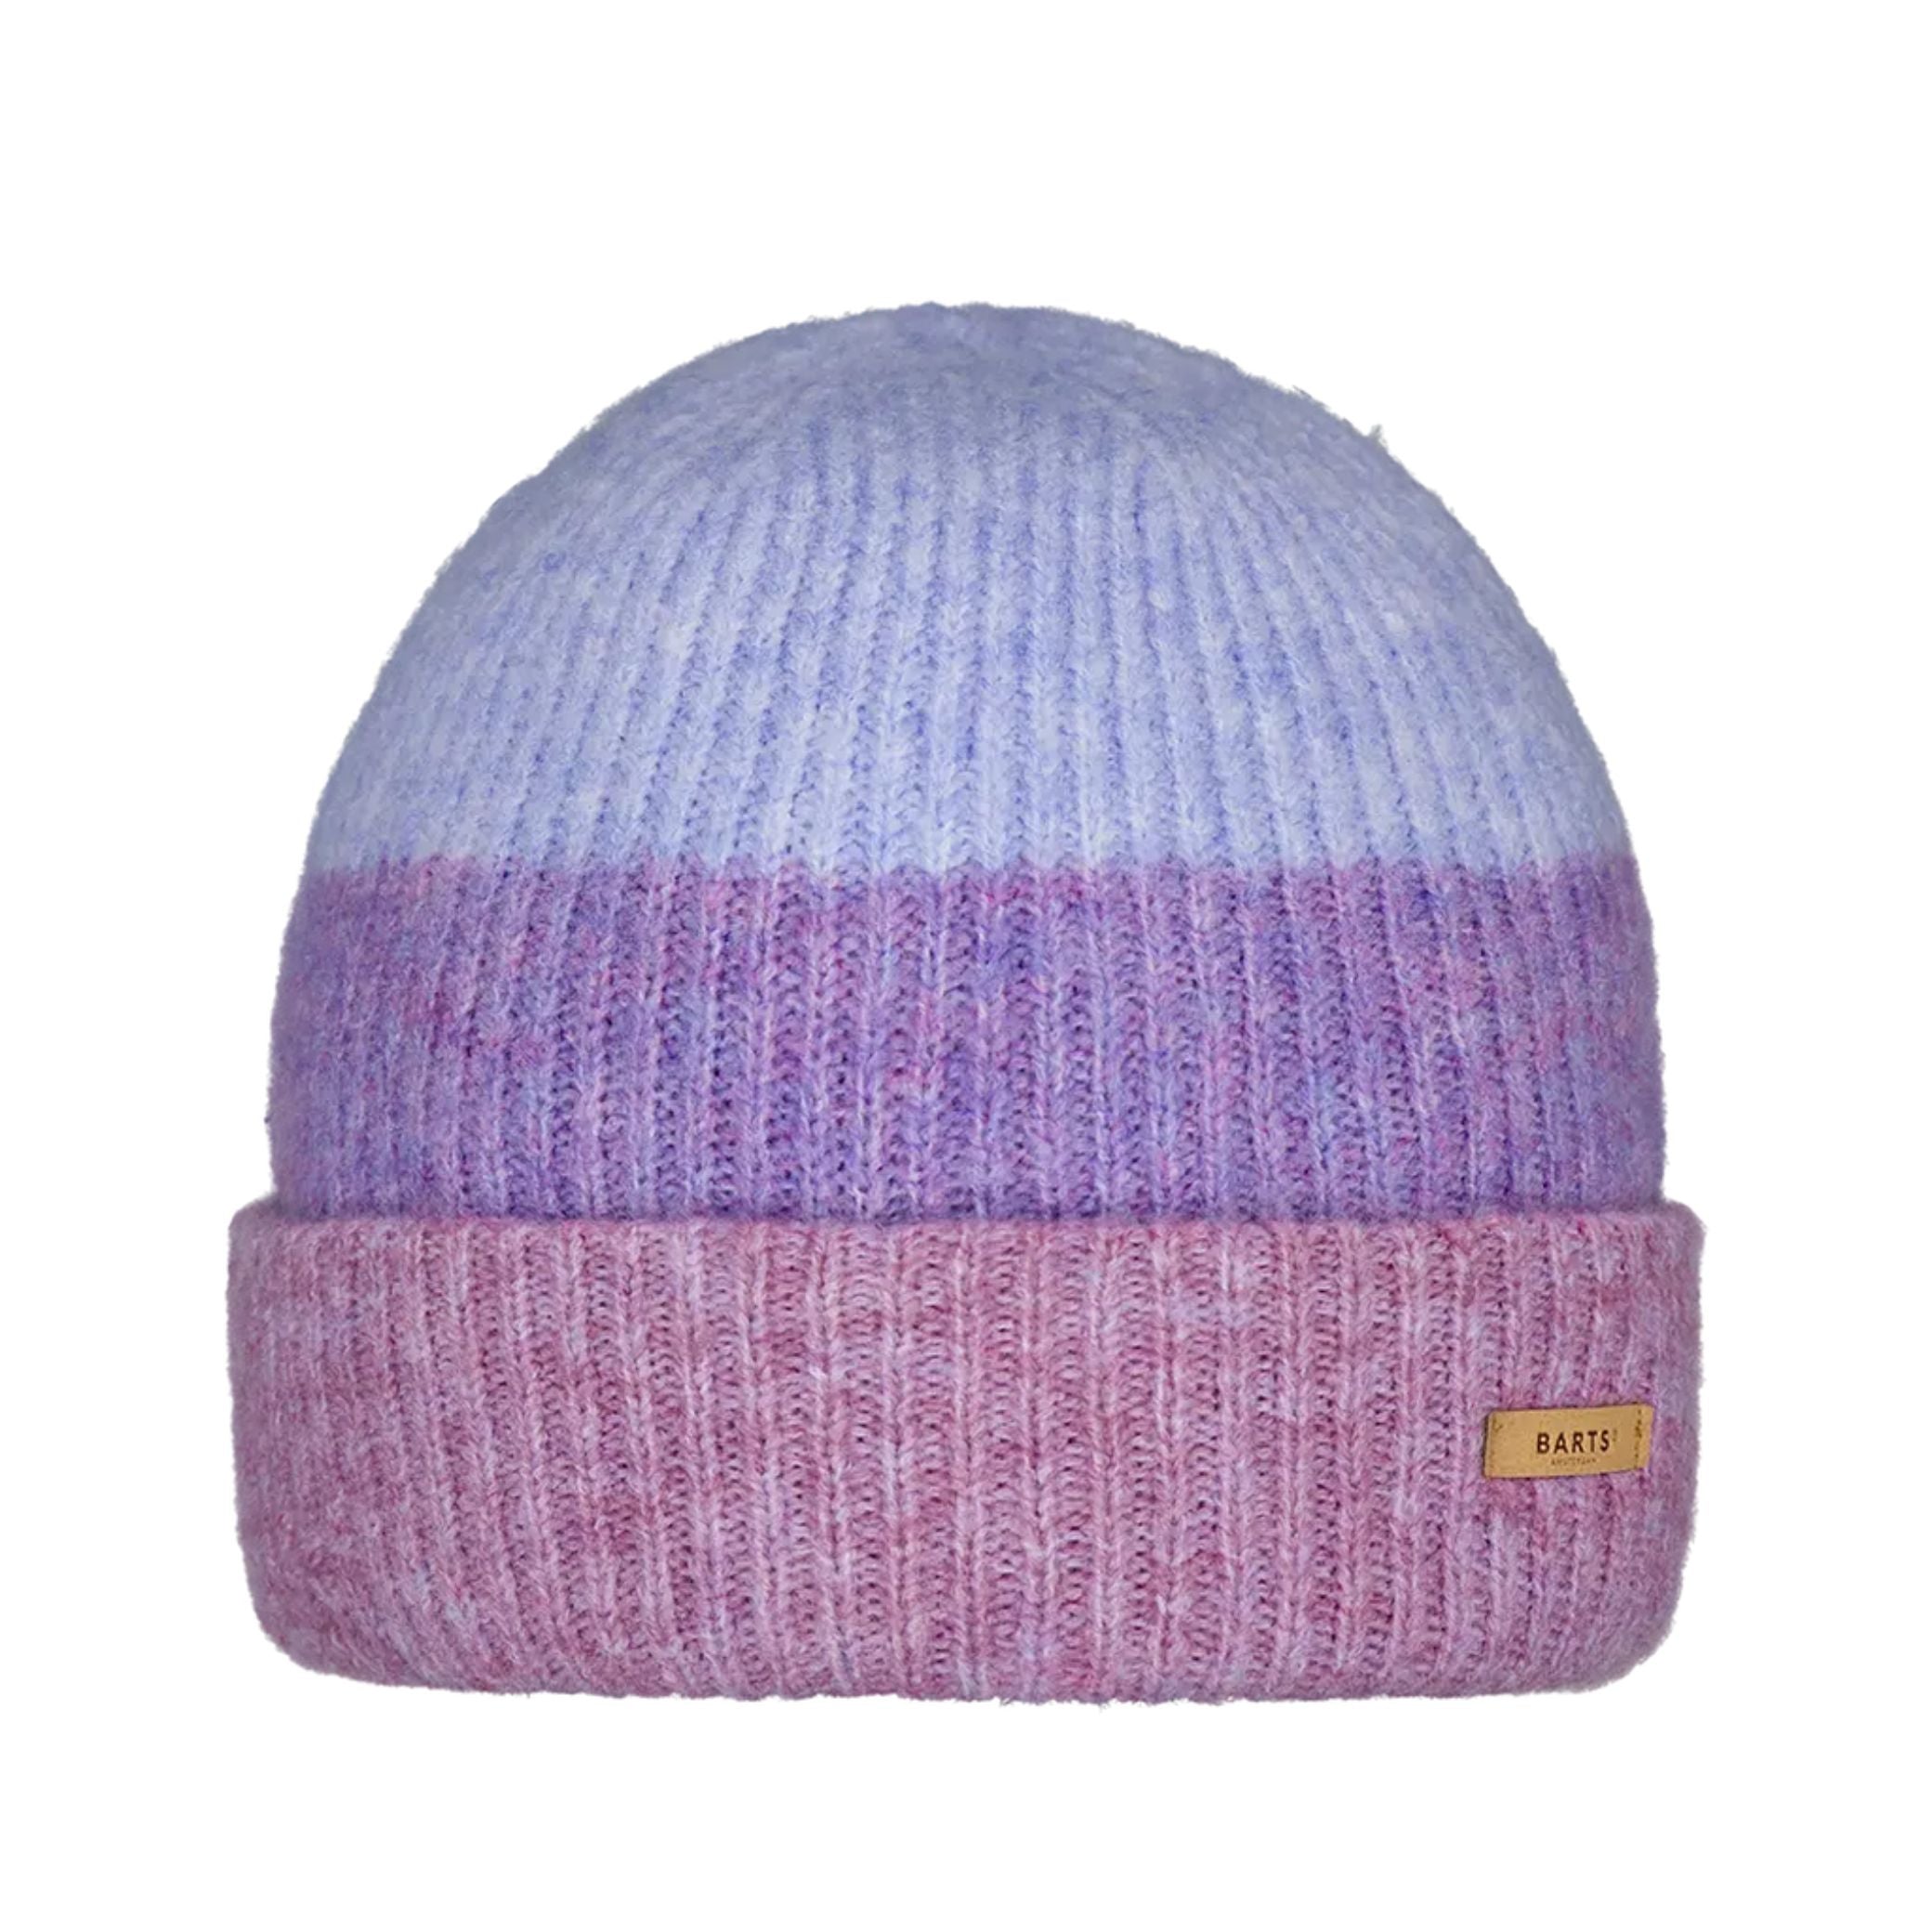 Beanie | - Shop The Suzam Portwest Barts Outdoor